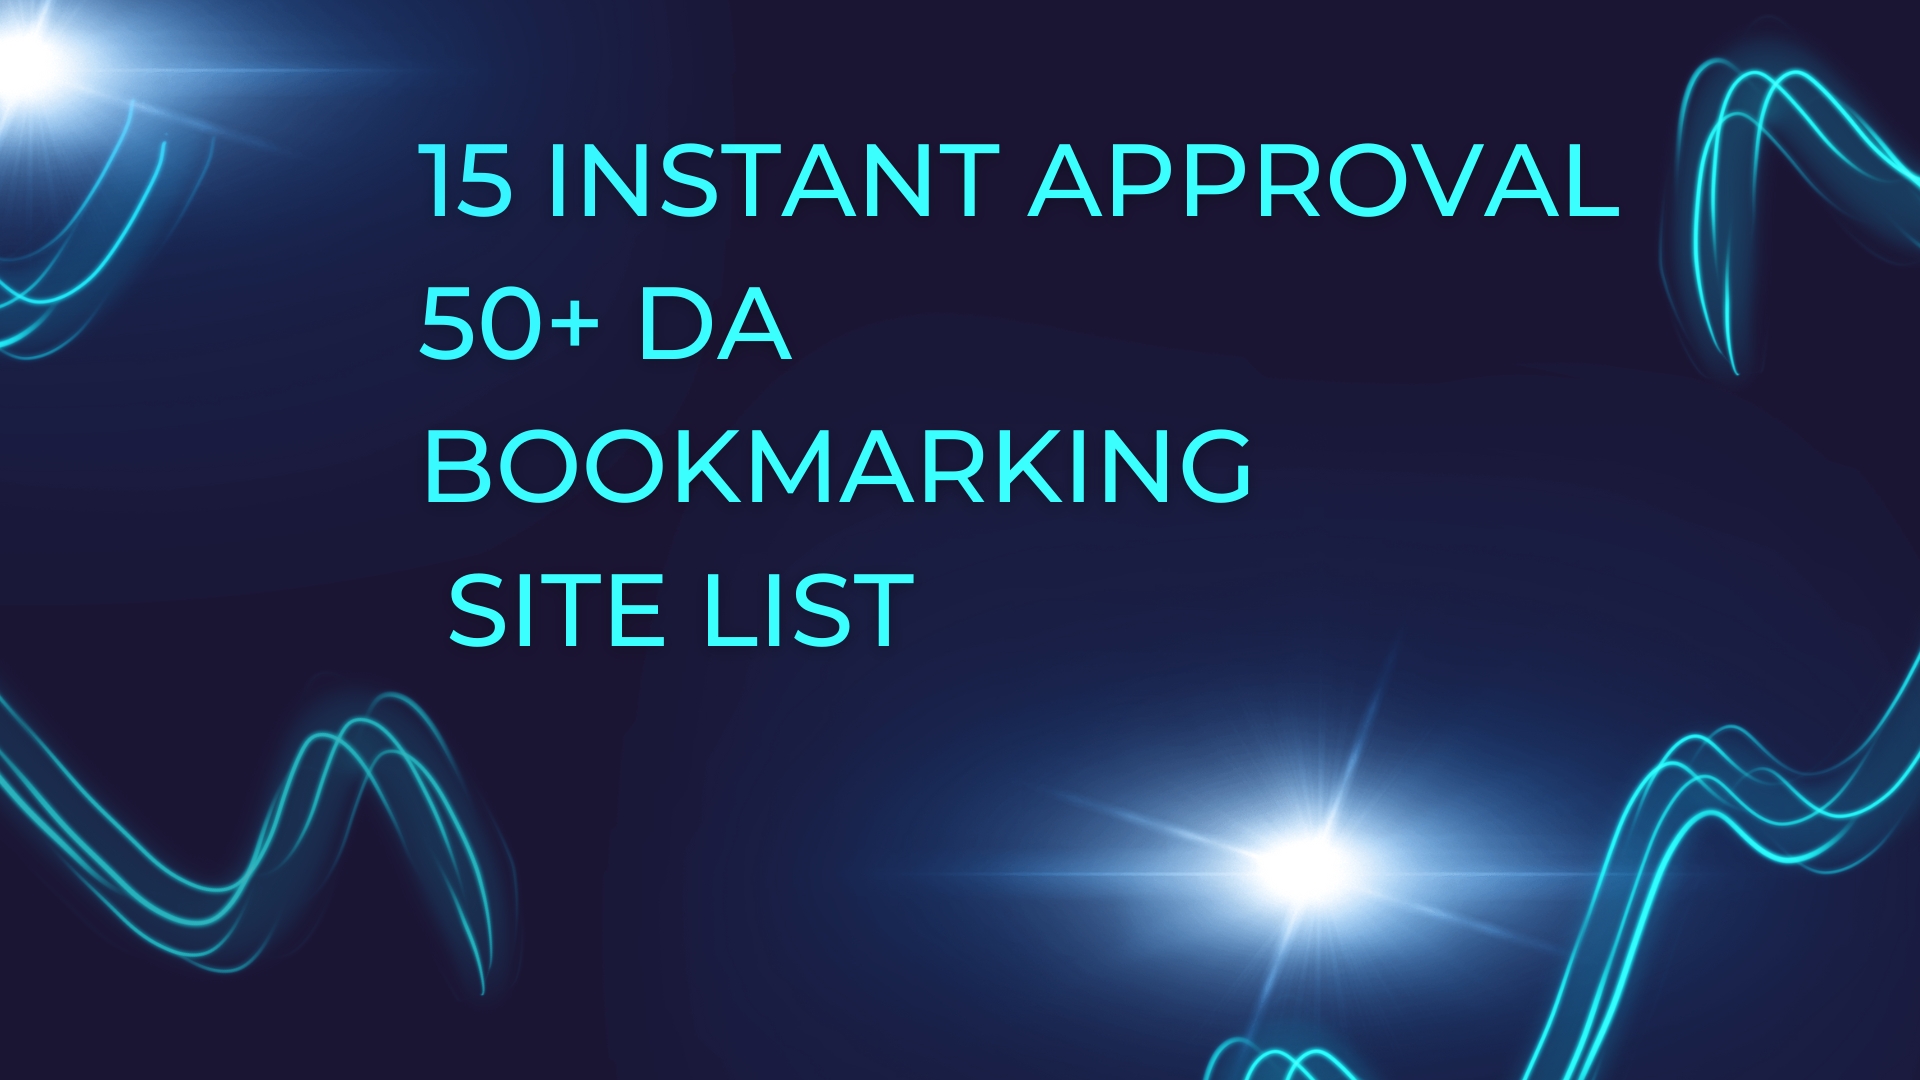 15 Instant Approval Bookmarking Sites 50+ DA